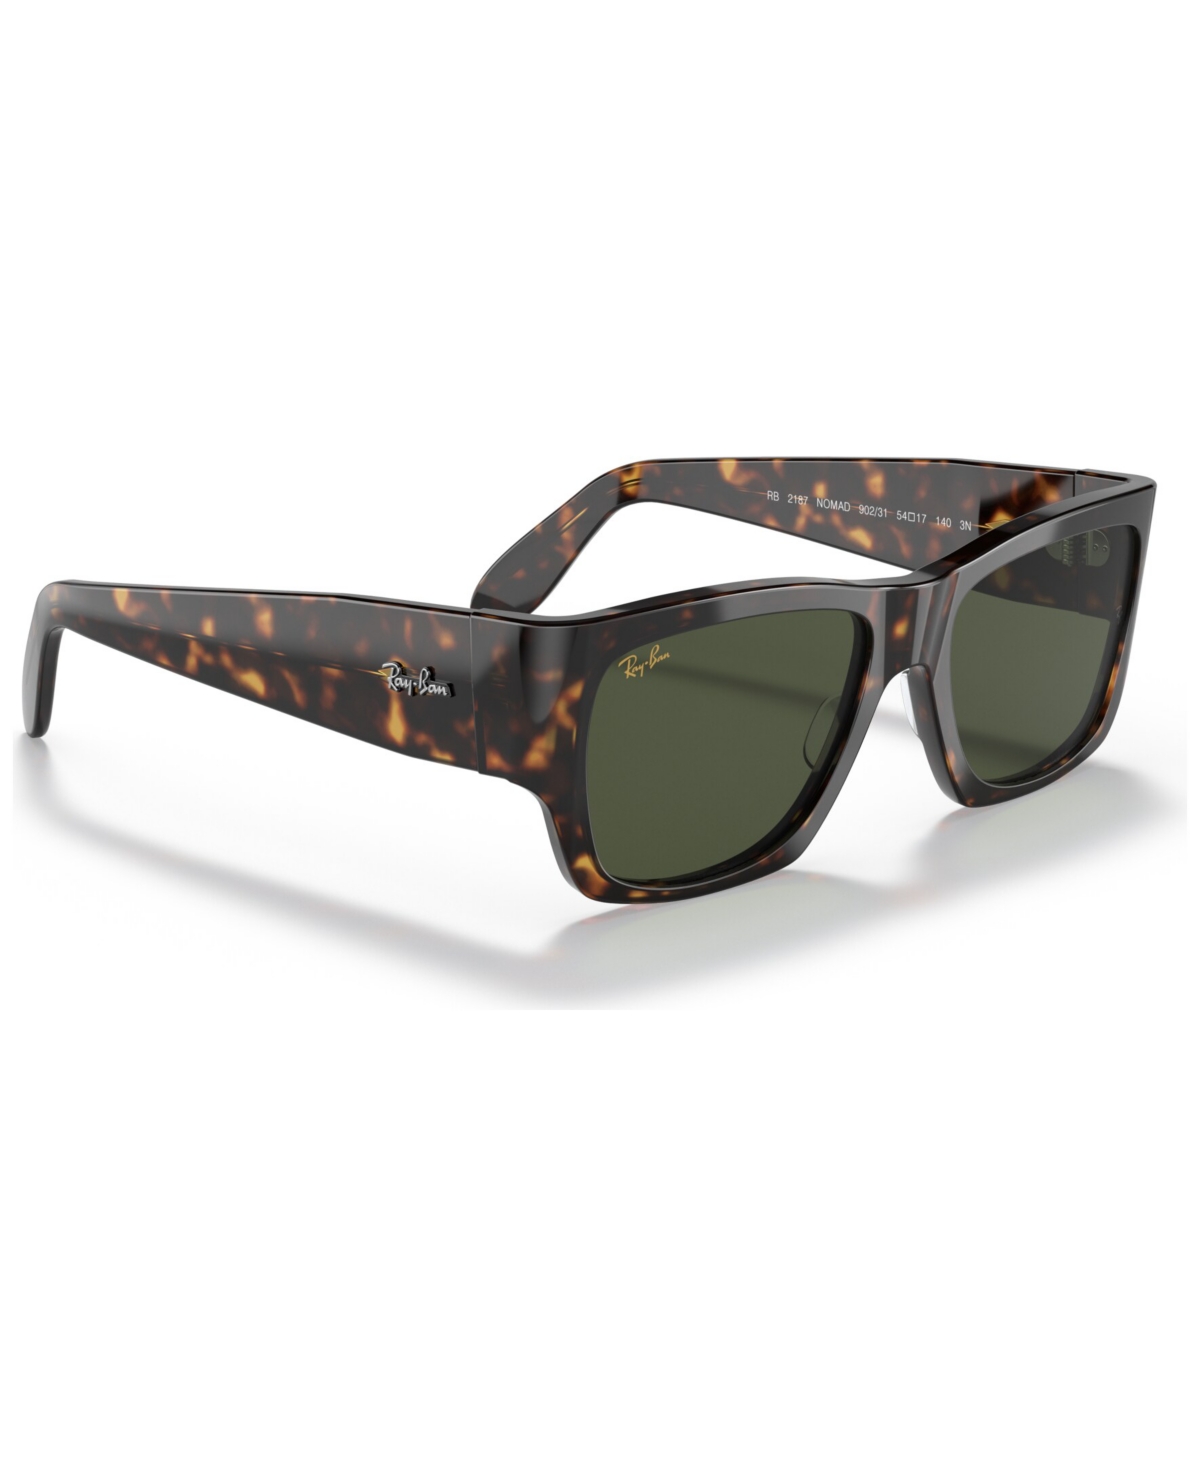 Ray Ban Unisex Nomad Reloaded Sunglasses, Rb2187 In Shiny Havana